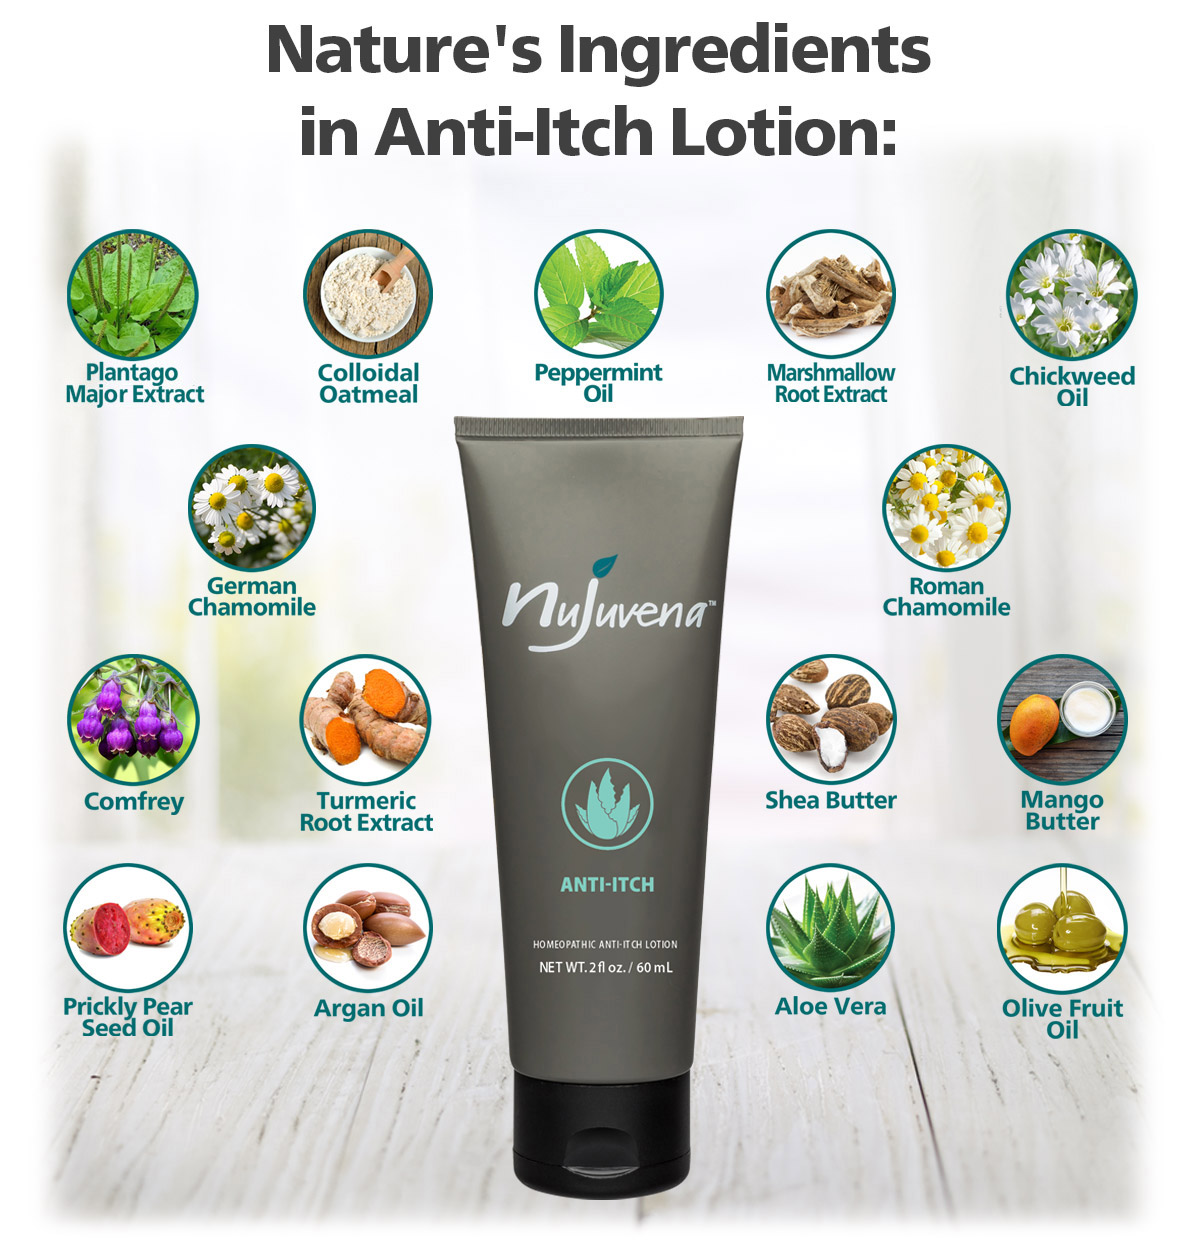 Anti-Itch by Nujuvena is a soothing lotion that helps to calm and hydrate dry, itchy, irritated skin without the use of steroids. And, with the homeopathic active ingredient helichrysum, Anti-Itch by Nujuvena helps to soothe skin fast and it may even help to restore itchy and inflamed skin to a healthy, itch-free state.